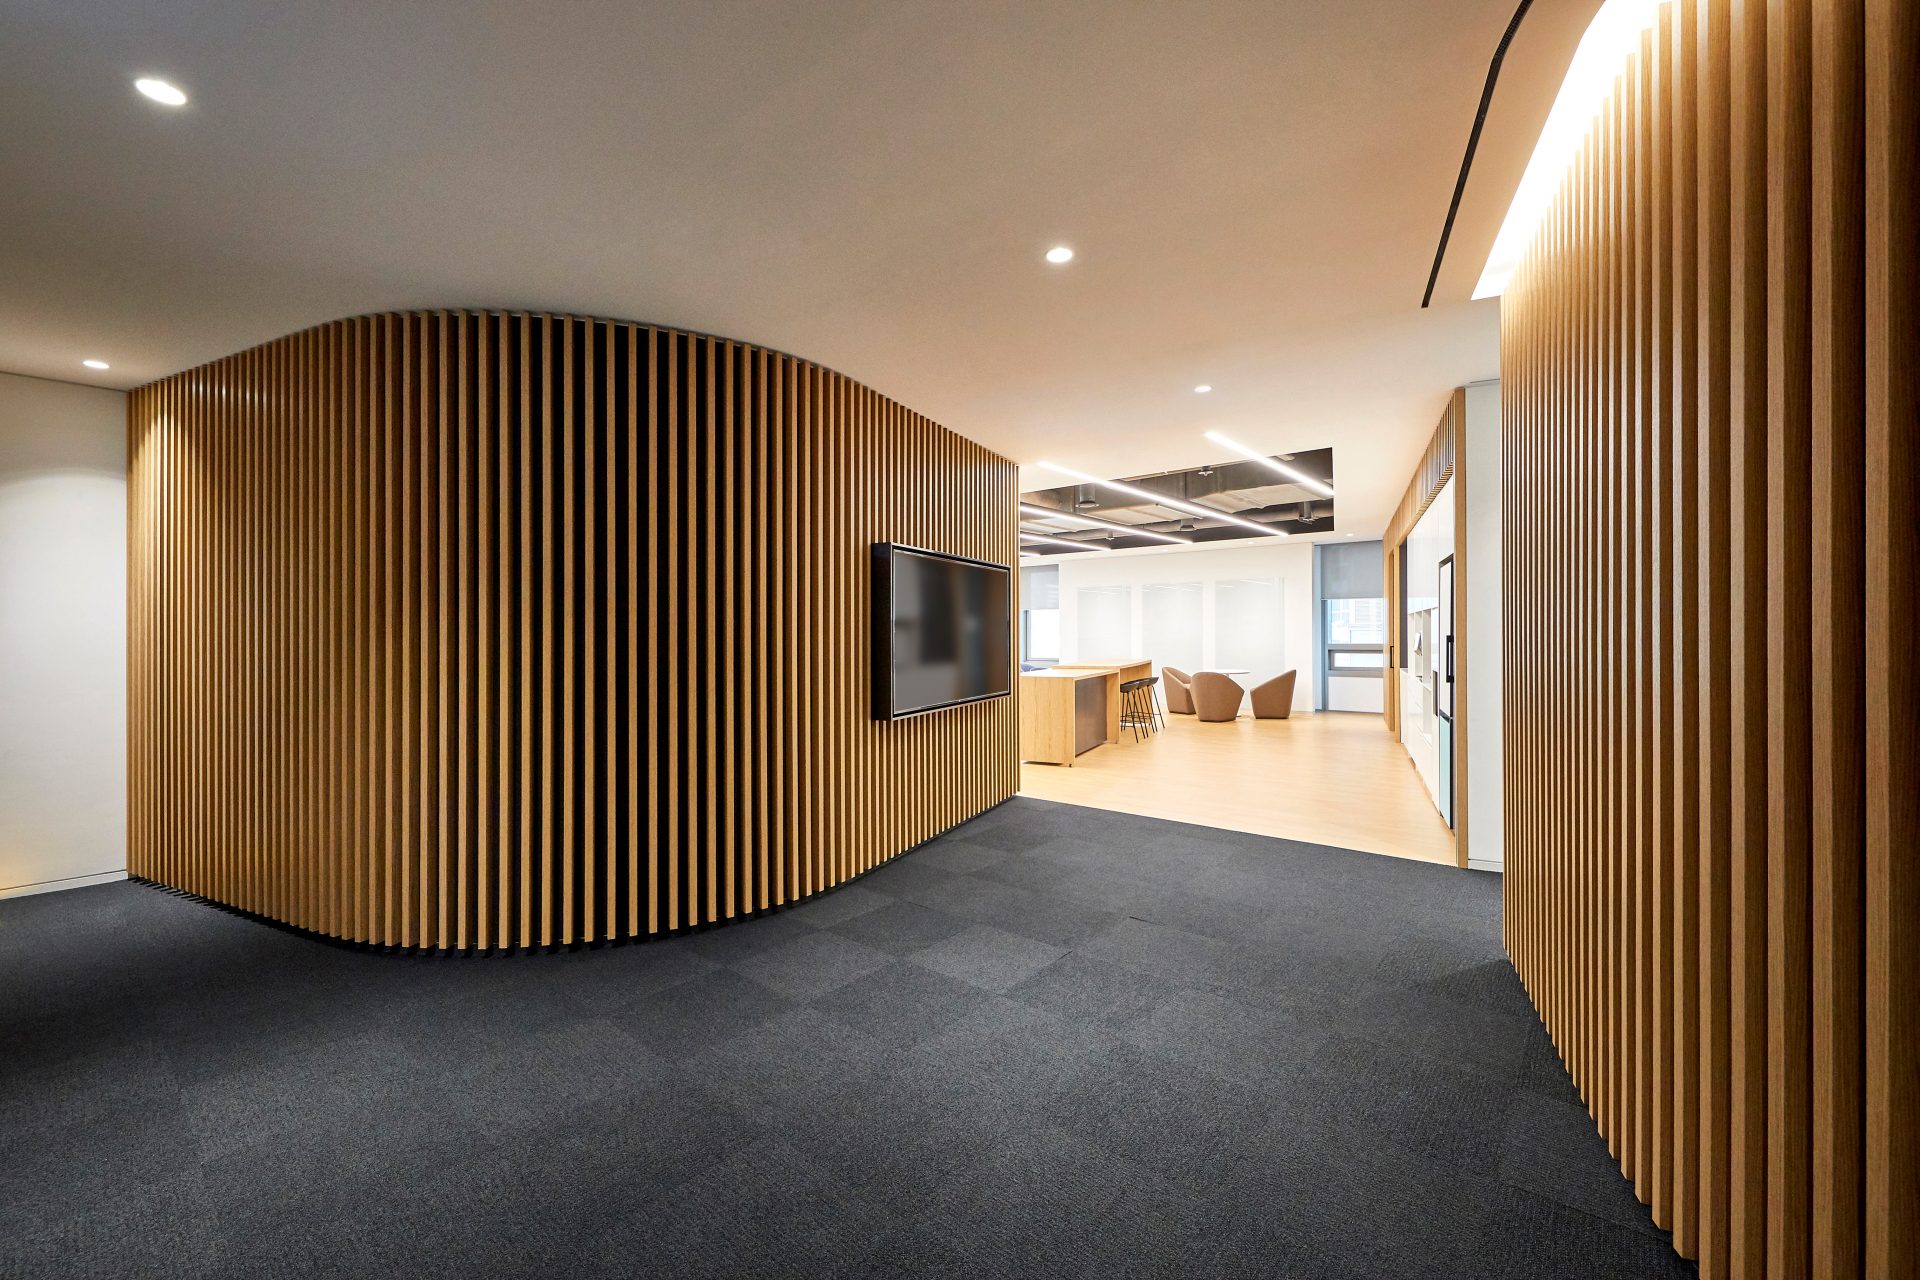 The image shows the office area at BMW Group Korea,